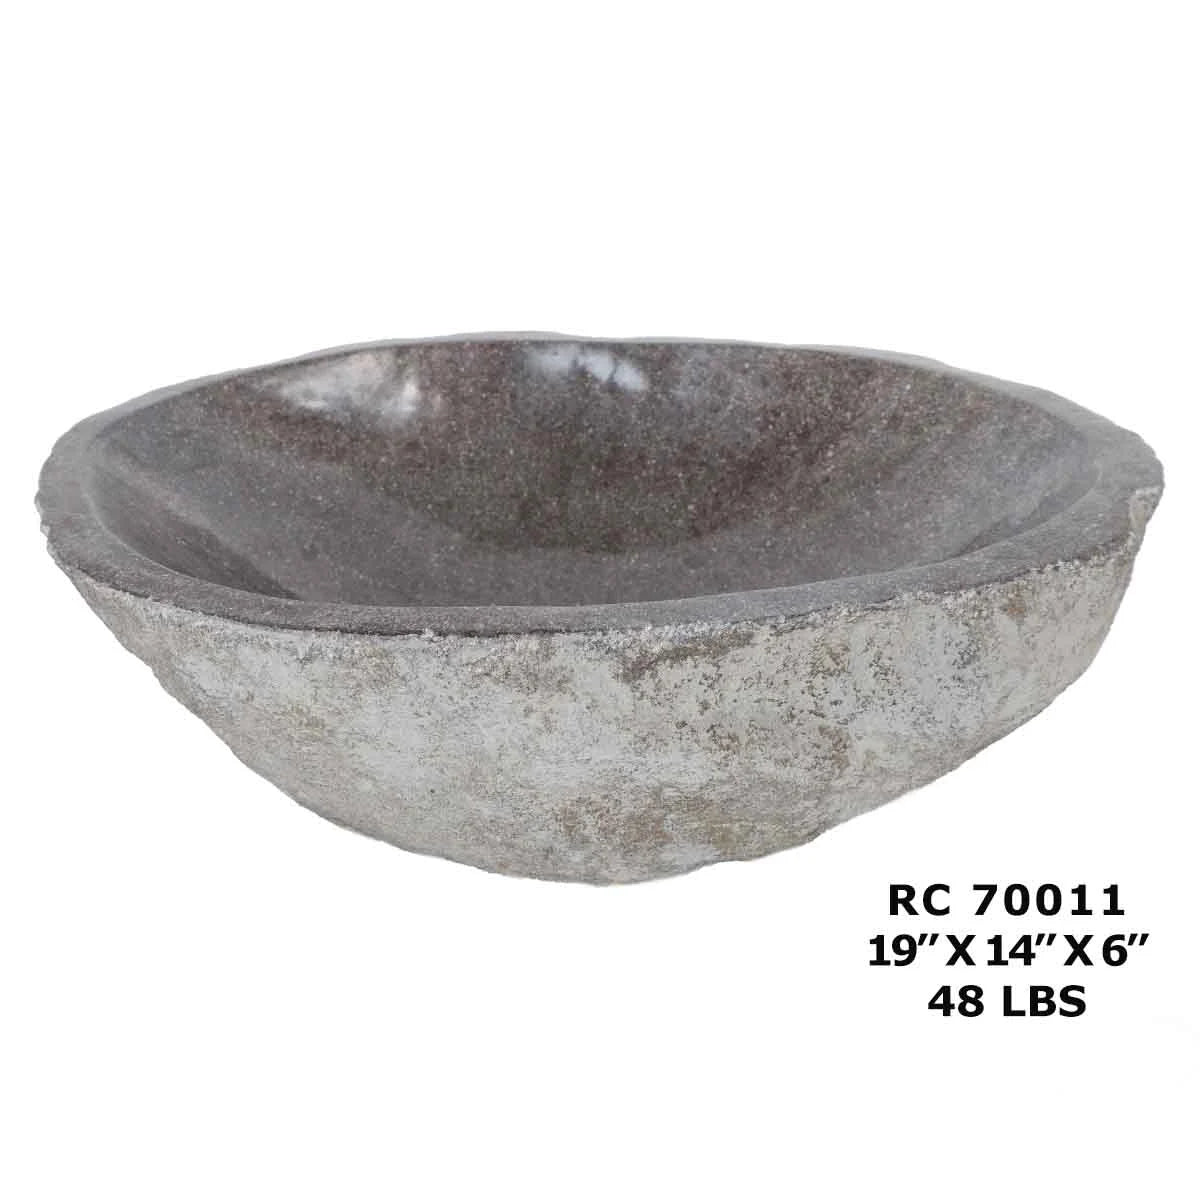 RC70011-Natural Stone Oval Vessel Bathroom Sink | River Stone Sink